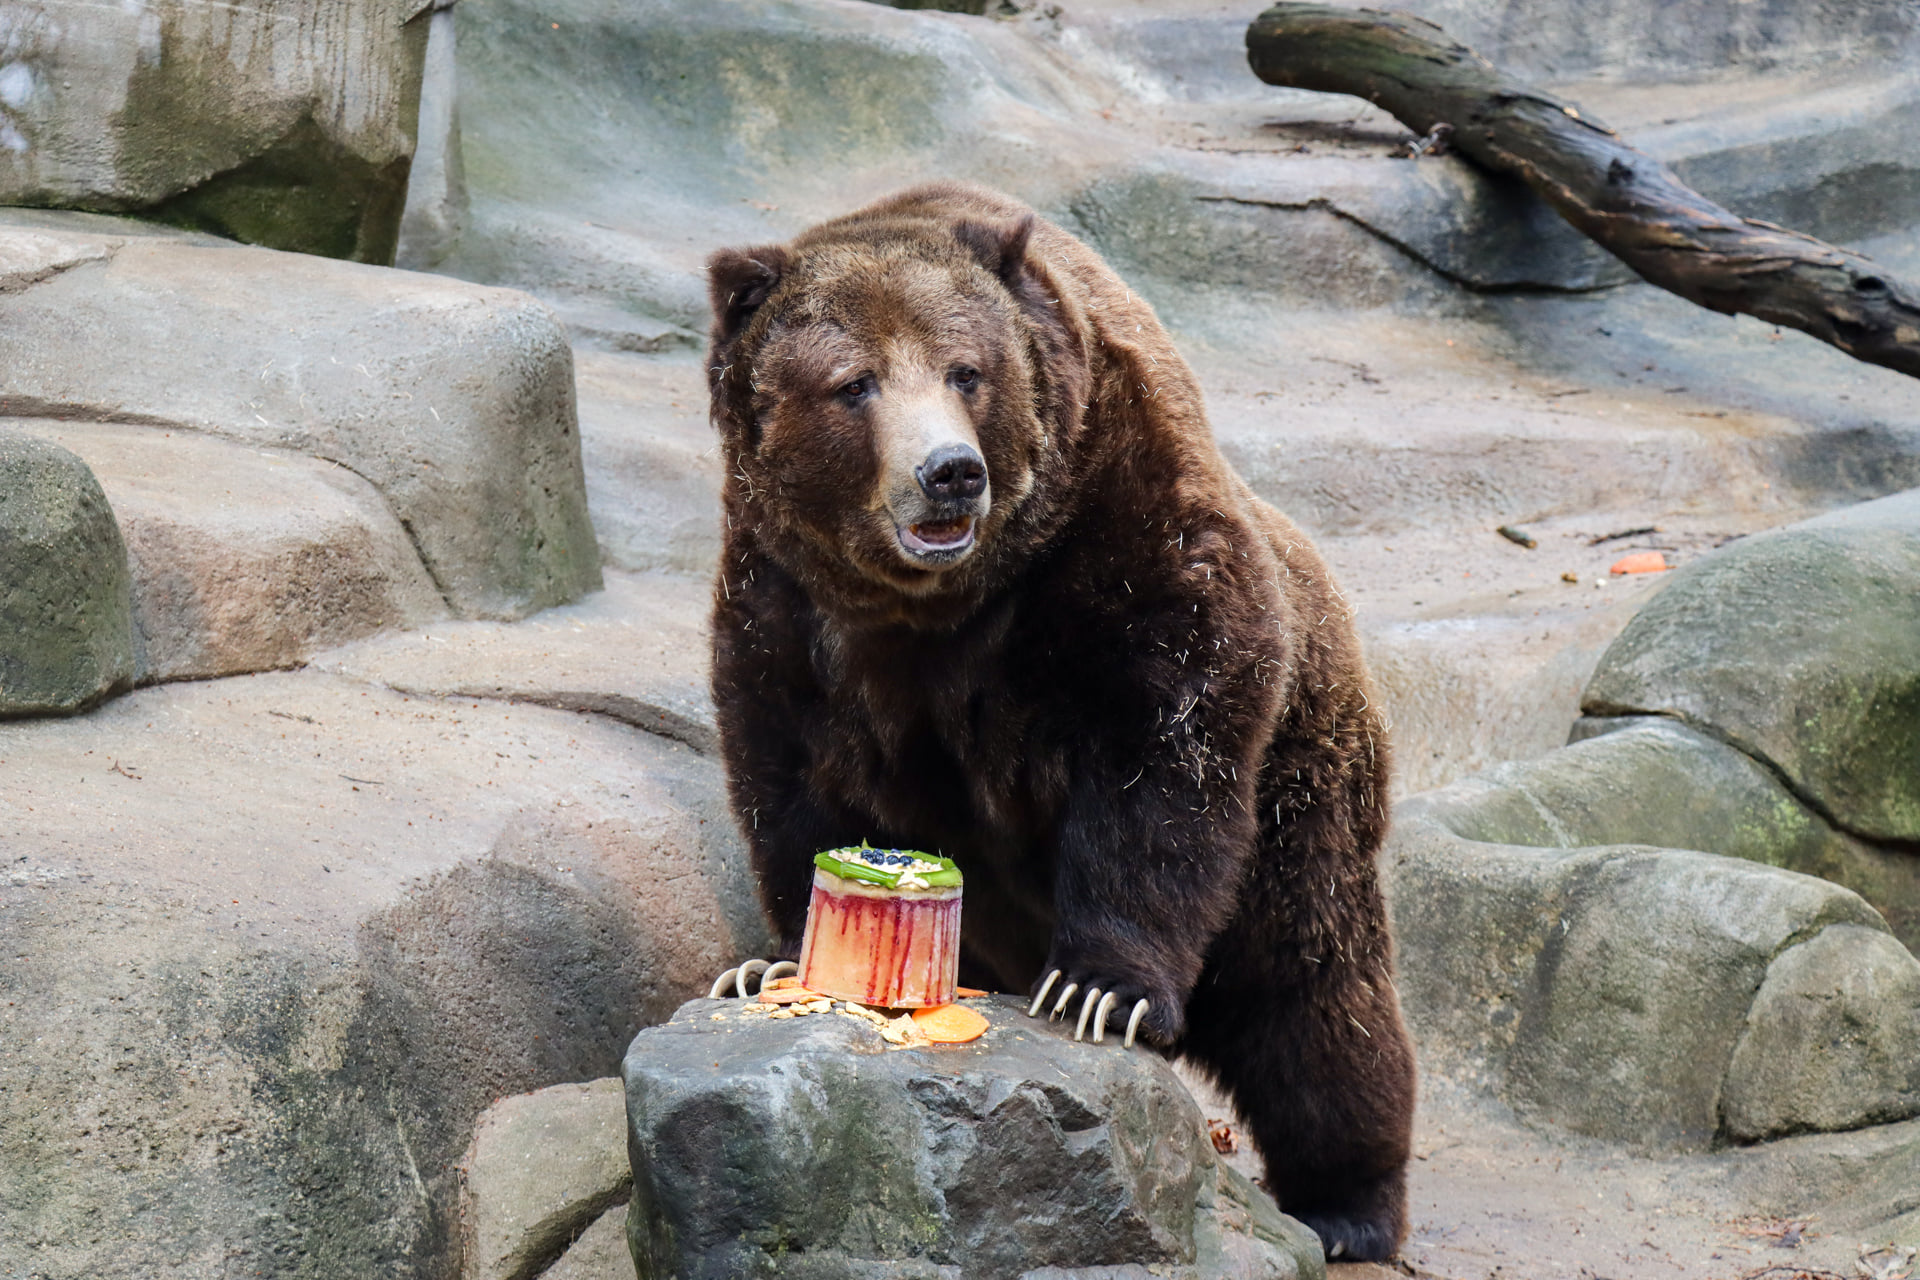 Last remaining grizzly bear at Little Rock Zoo dies